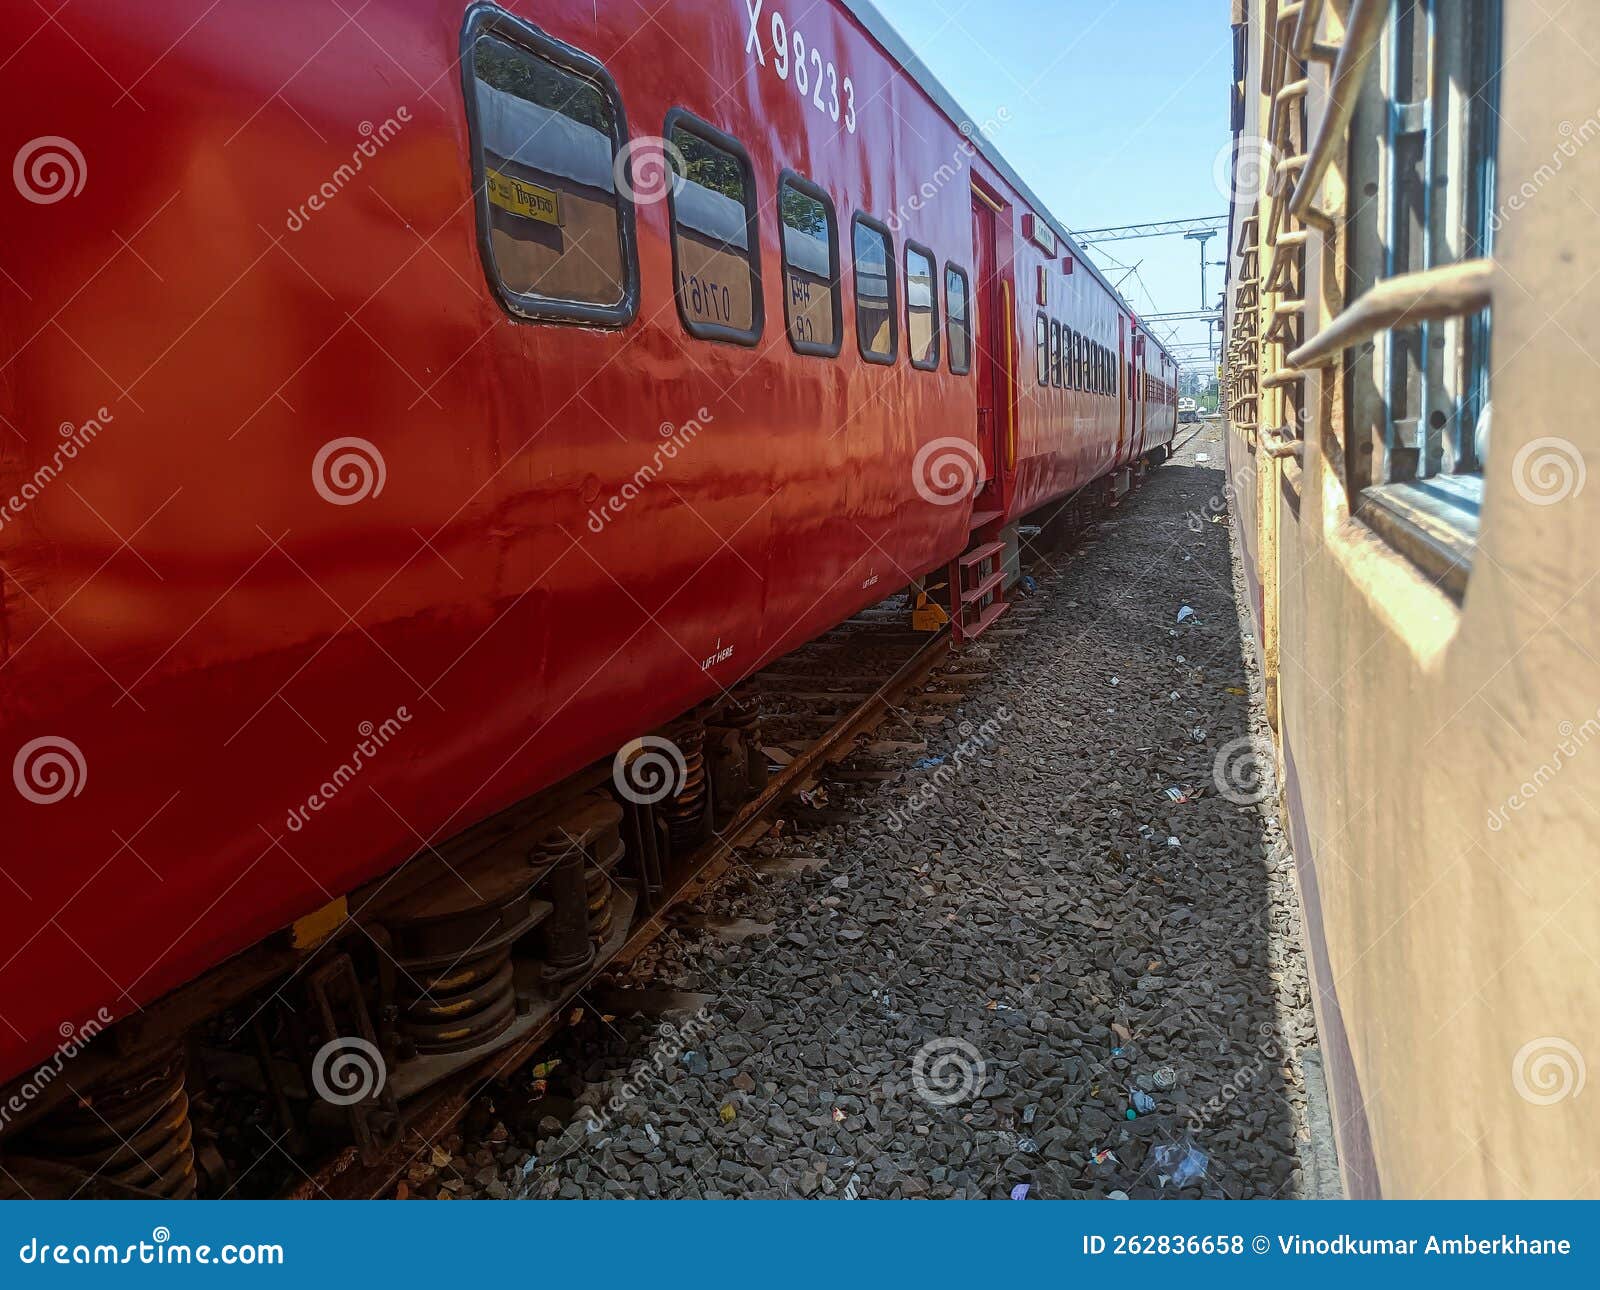 train travelling in opposite direction